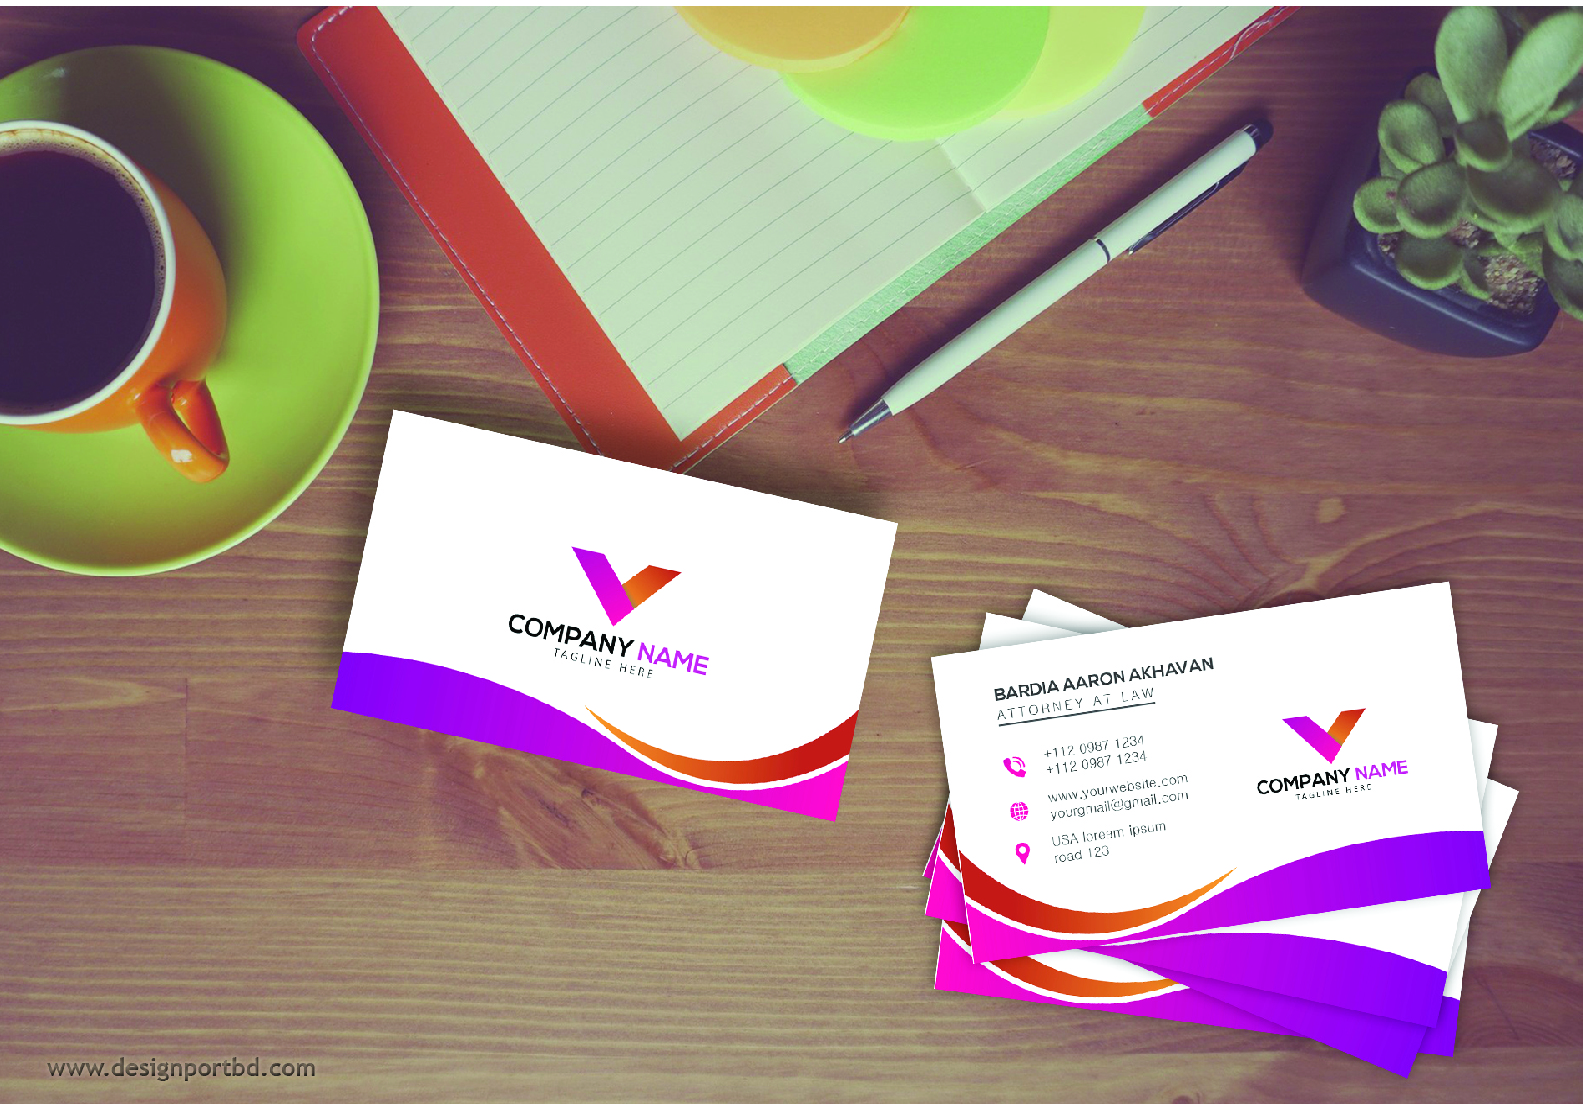 I will do professional business logo and minimalist business card design